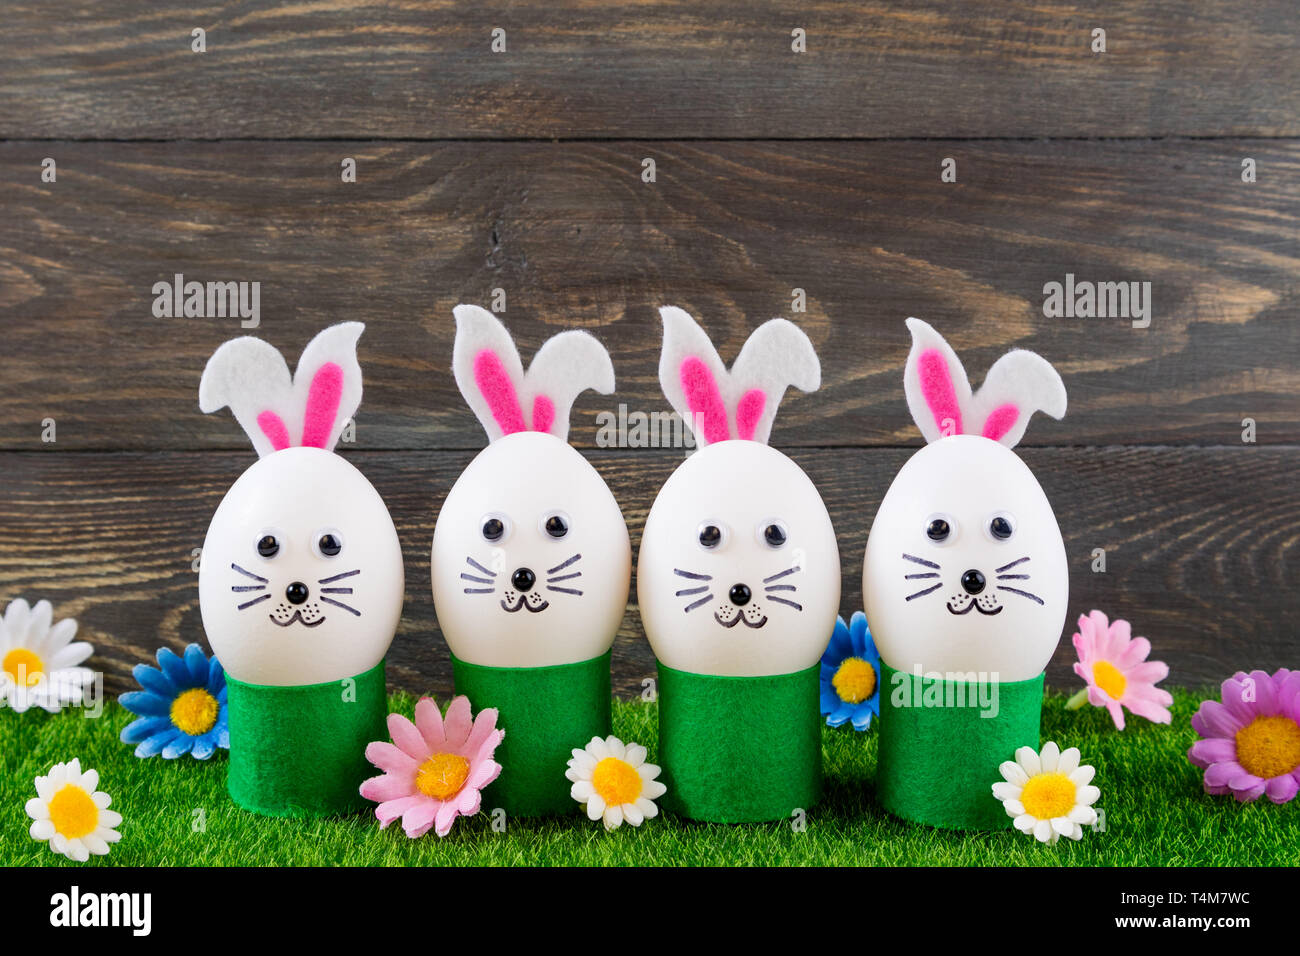 cute easter pictures ideas